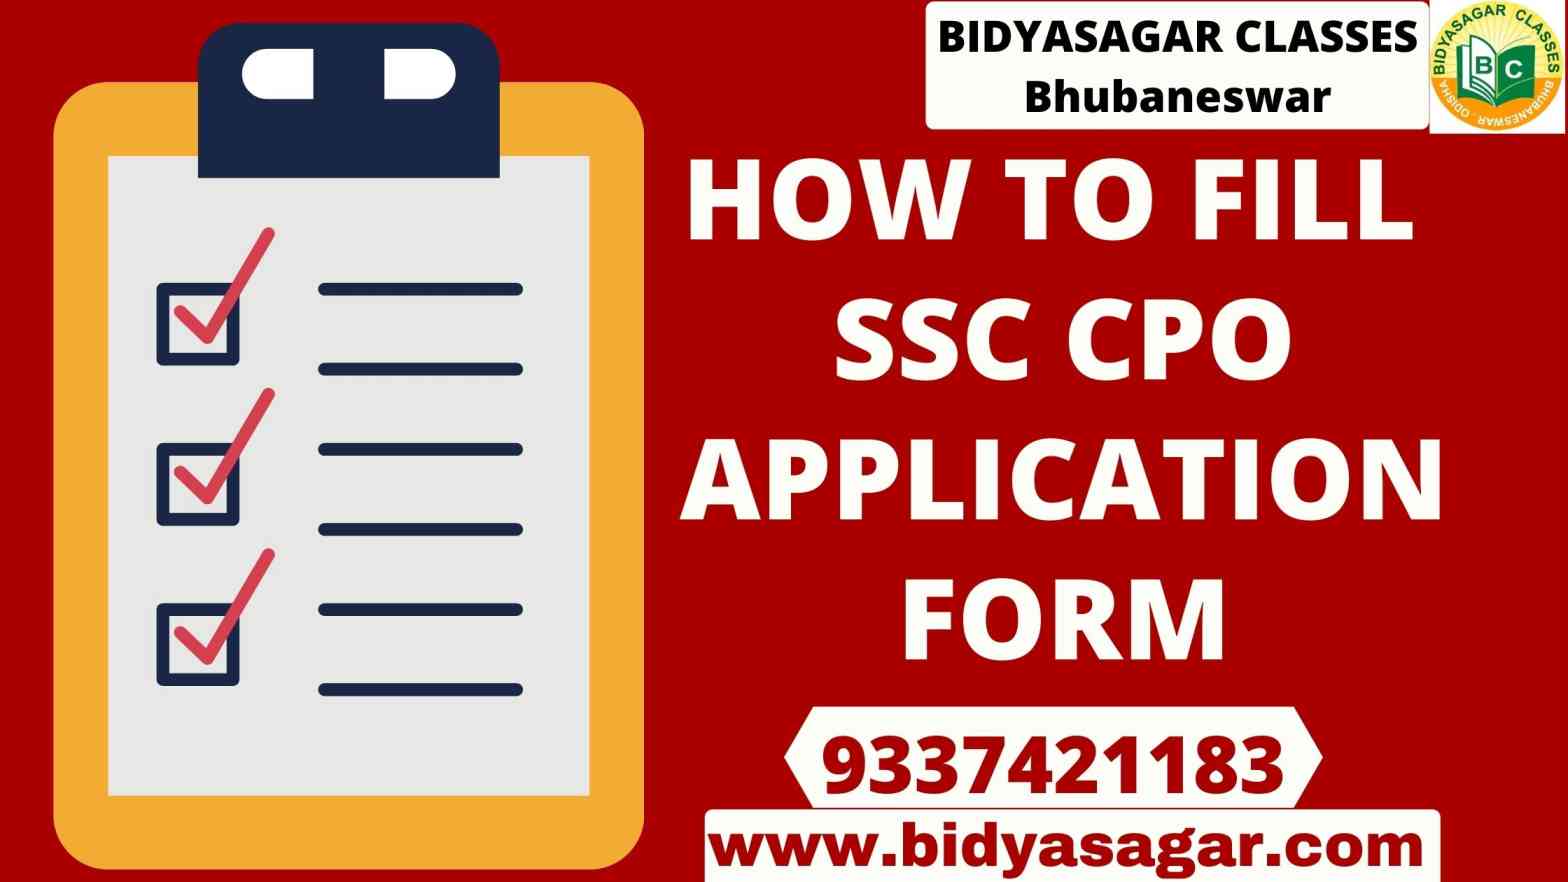 How to Fill SSC CPO Application Form 2020-21?